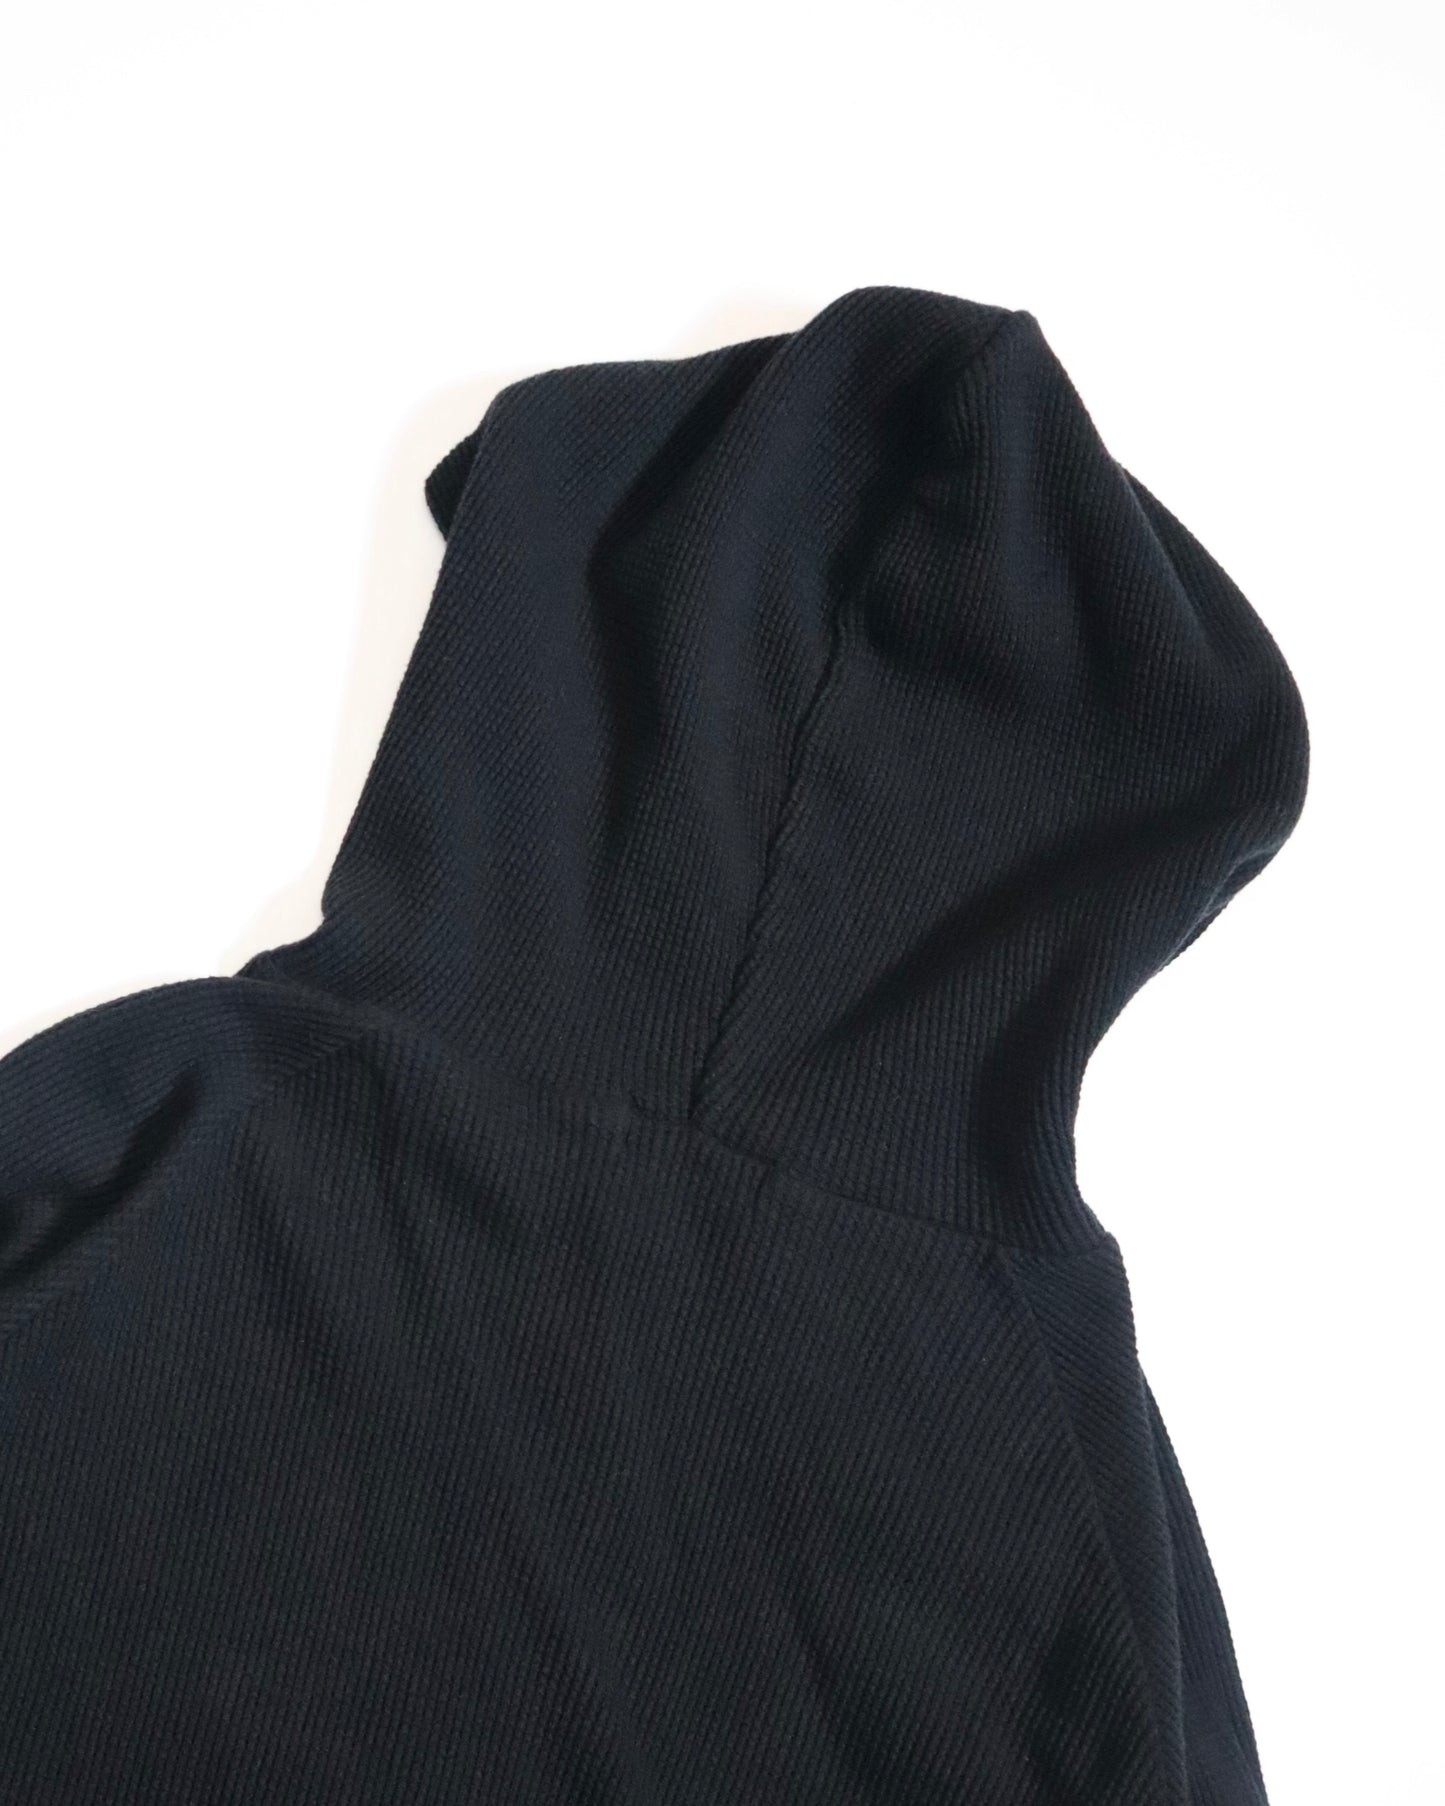 Undercover AW 09 Double-Zip Thermal Hoodie